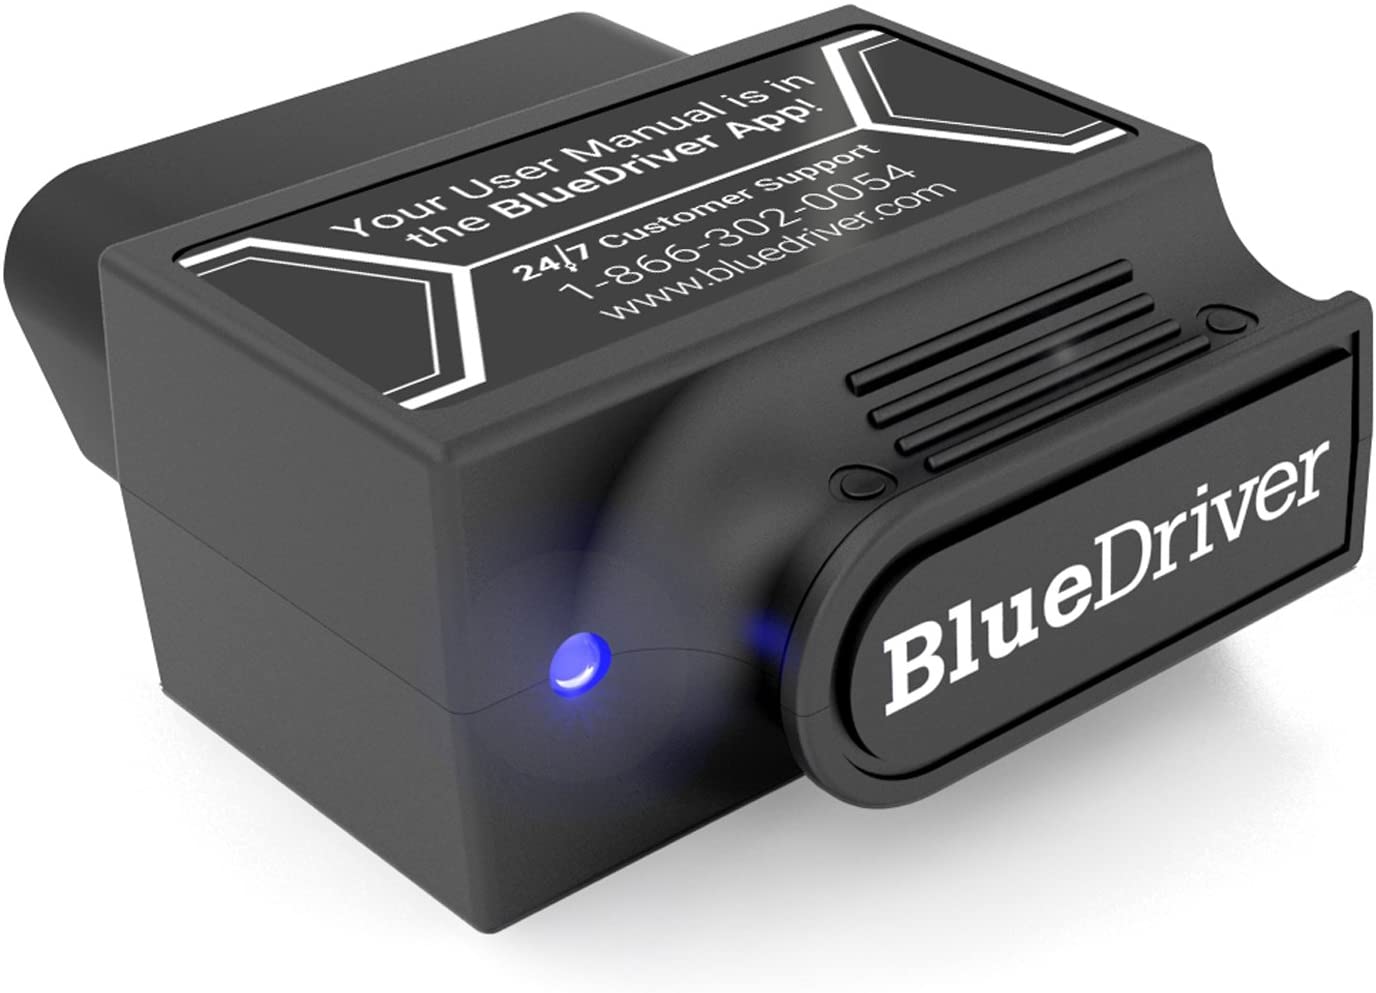 Amazon Prime Members: BlueDriver Pro OBDII Bluetooth/Diagnostic Scan Tool for iPhone & Android $59 AC + Free Shipping via Amazon